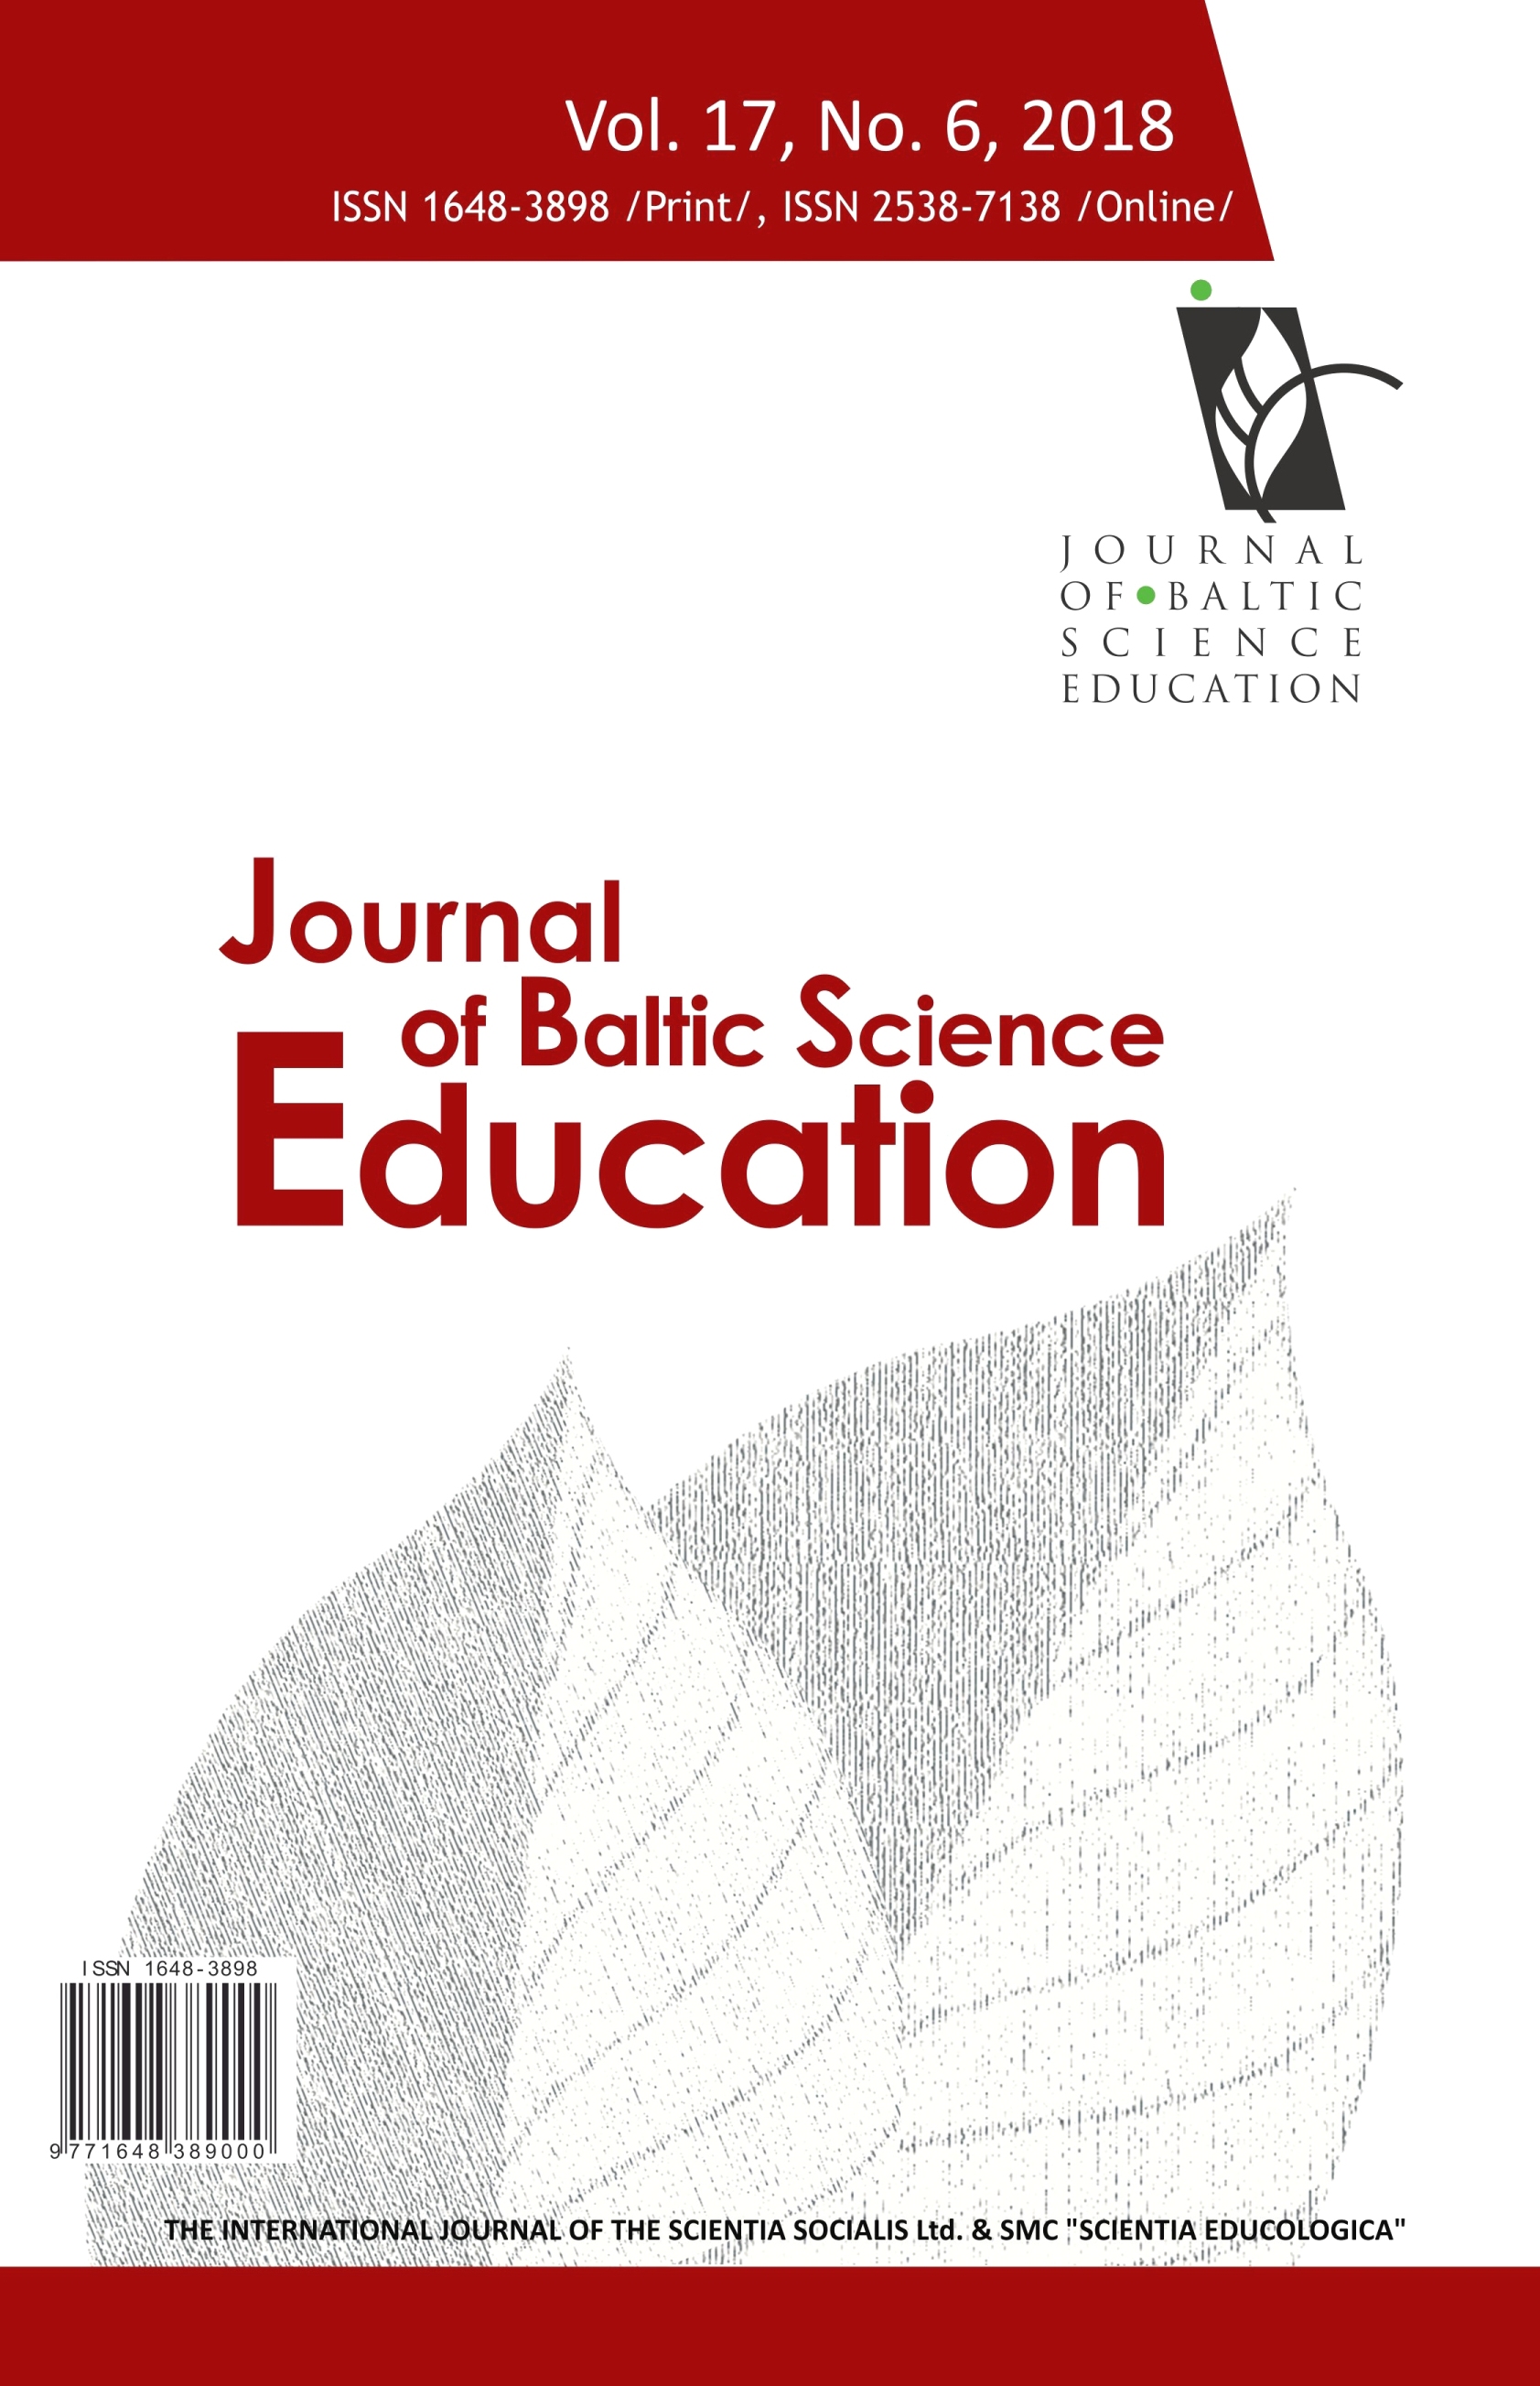 THE EFFECTIVENESS OF OIDDE LEARNING MODEL IN THE IMPROVEMENT OF BIOETHICS KNOWLEDGE, ETHICAL DECISION,  AND ETHICAL ATTITUDE OF BIOLOGY PRE-SERVICE TEACHERS